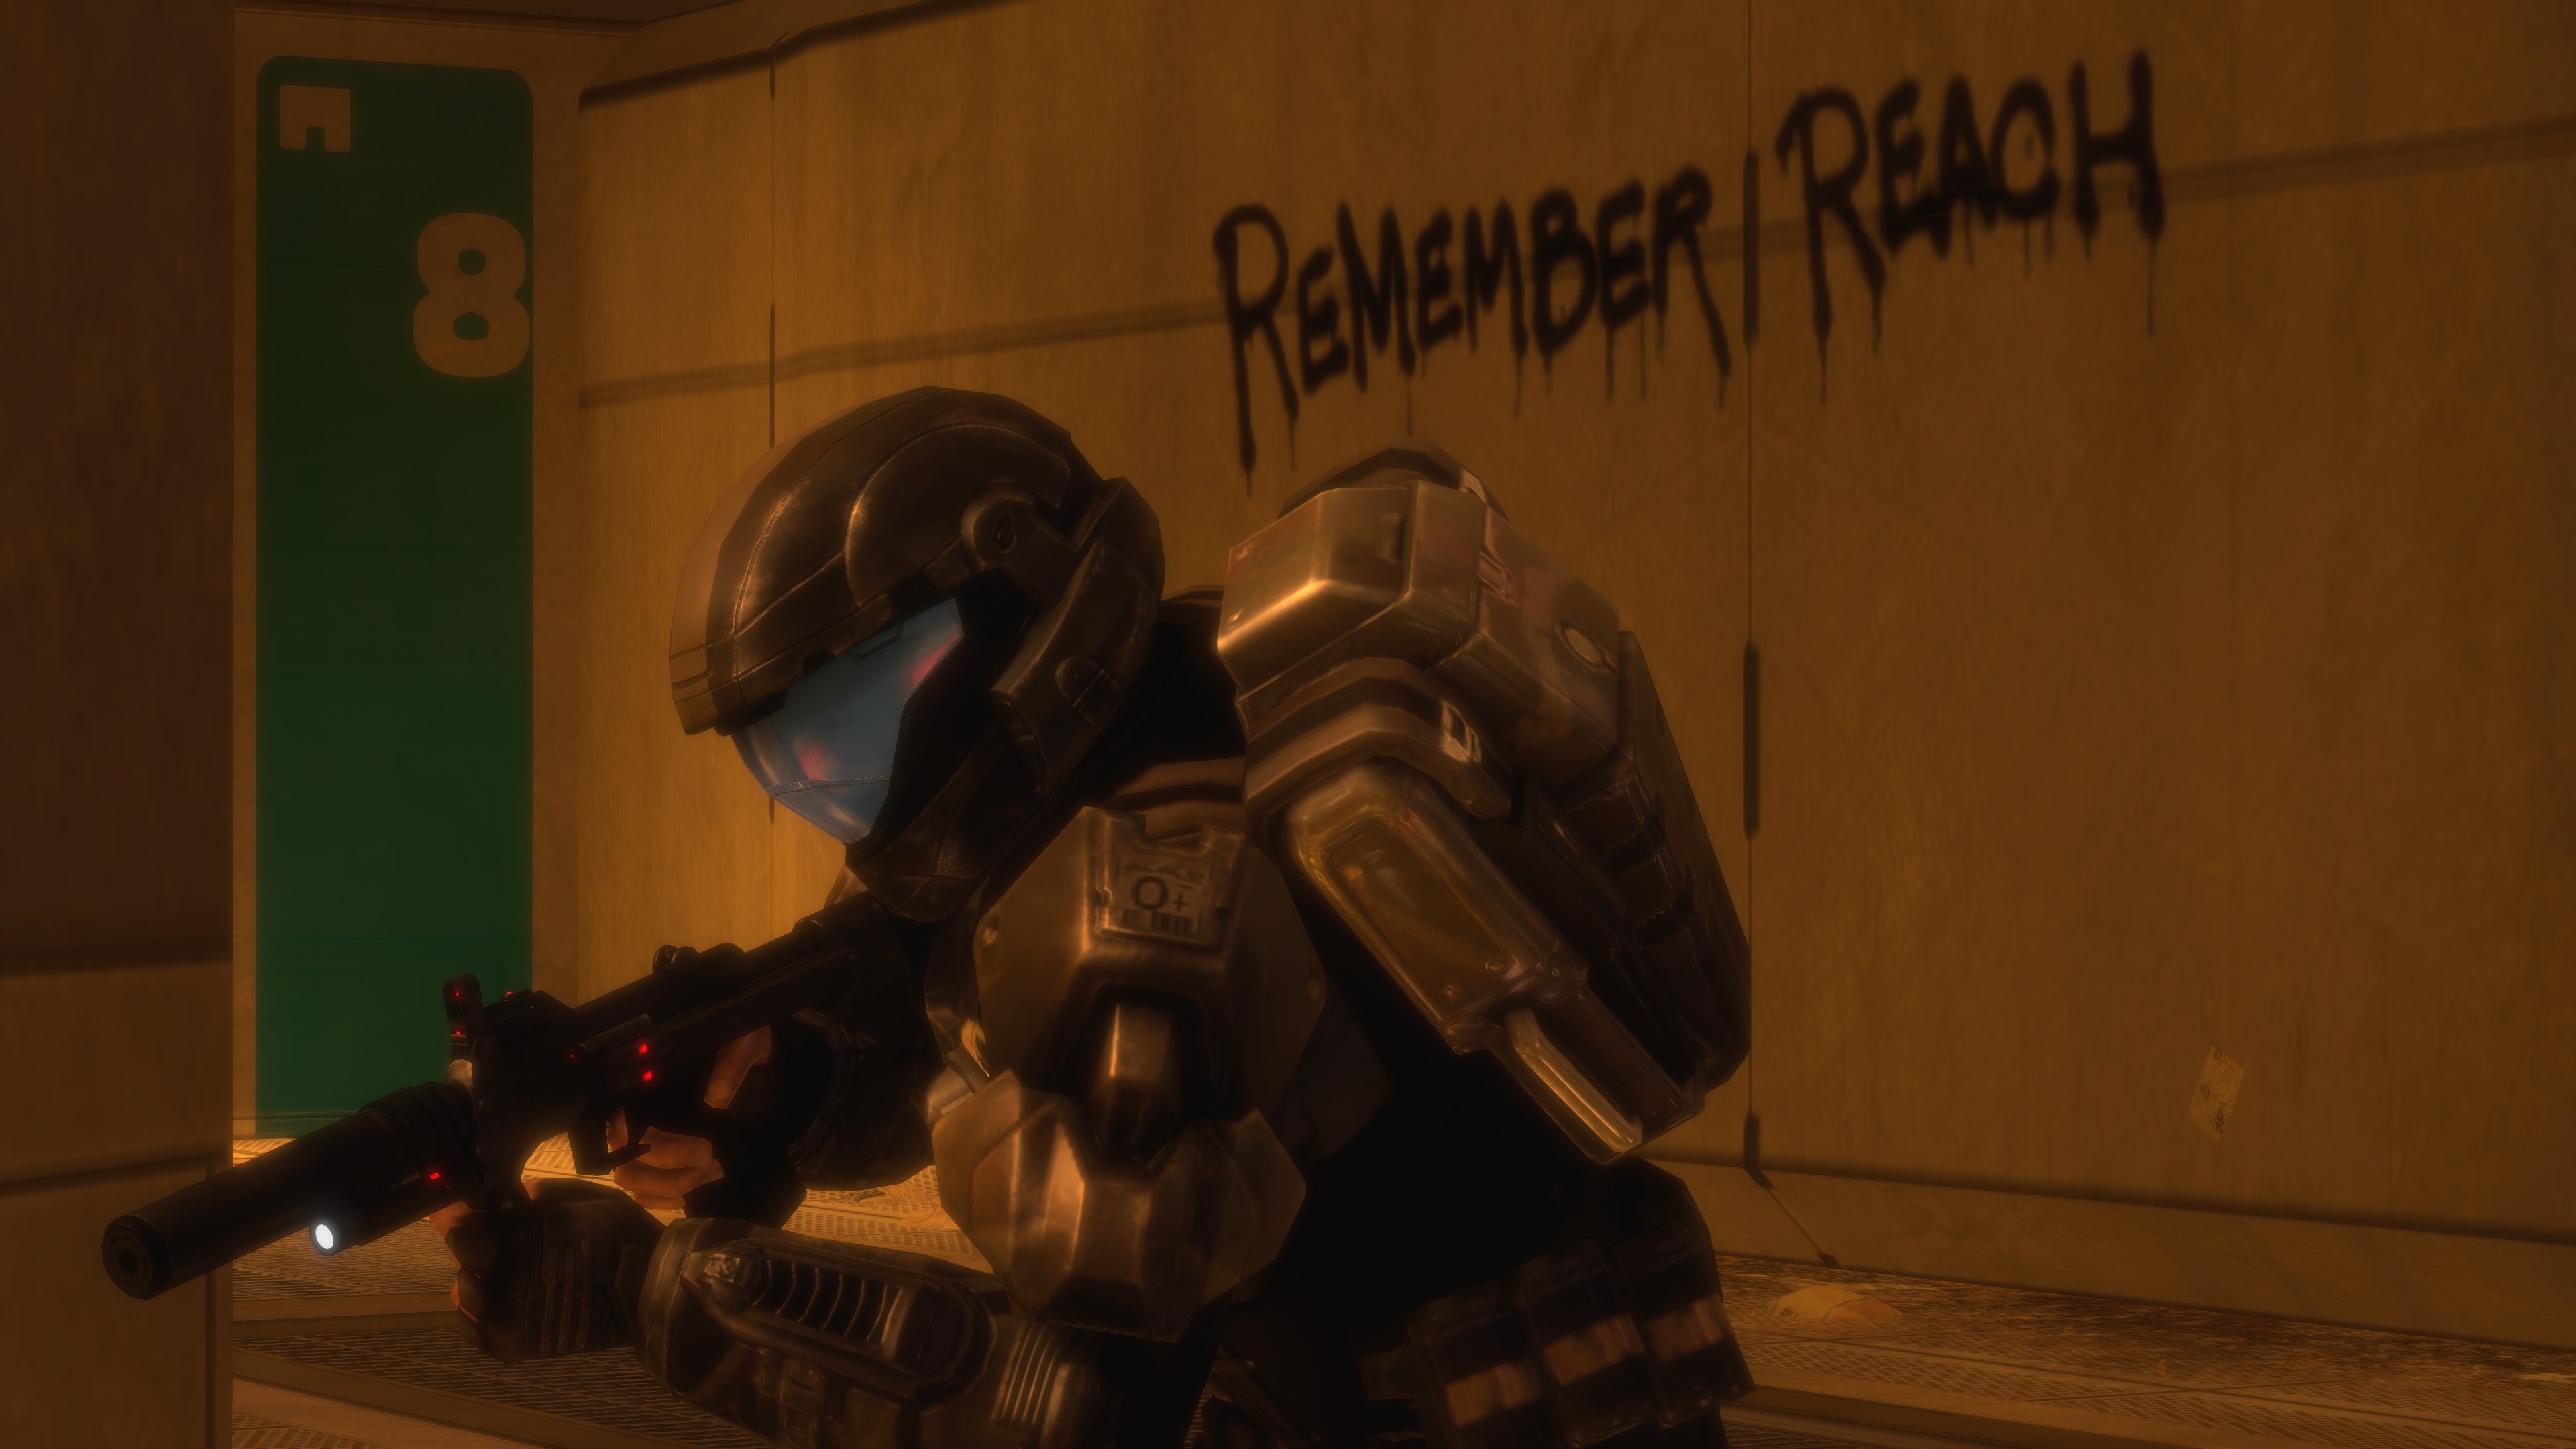 An ODST looking at the "Remember Reach" egg.